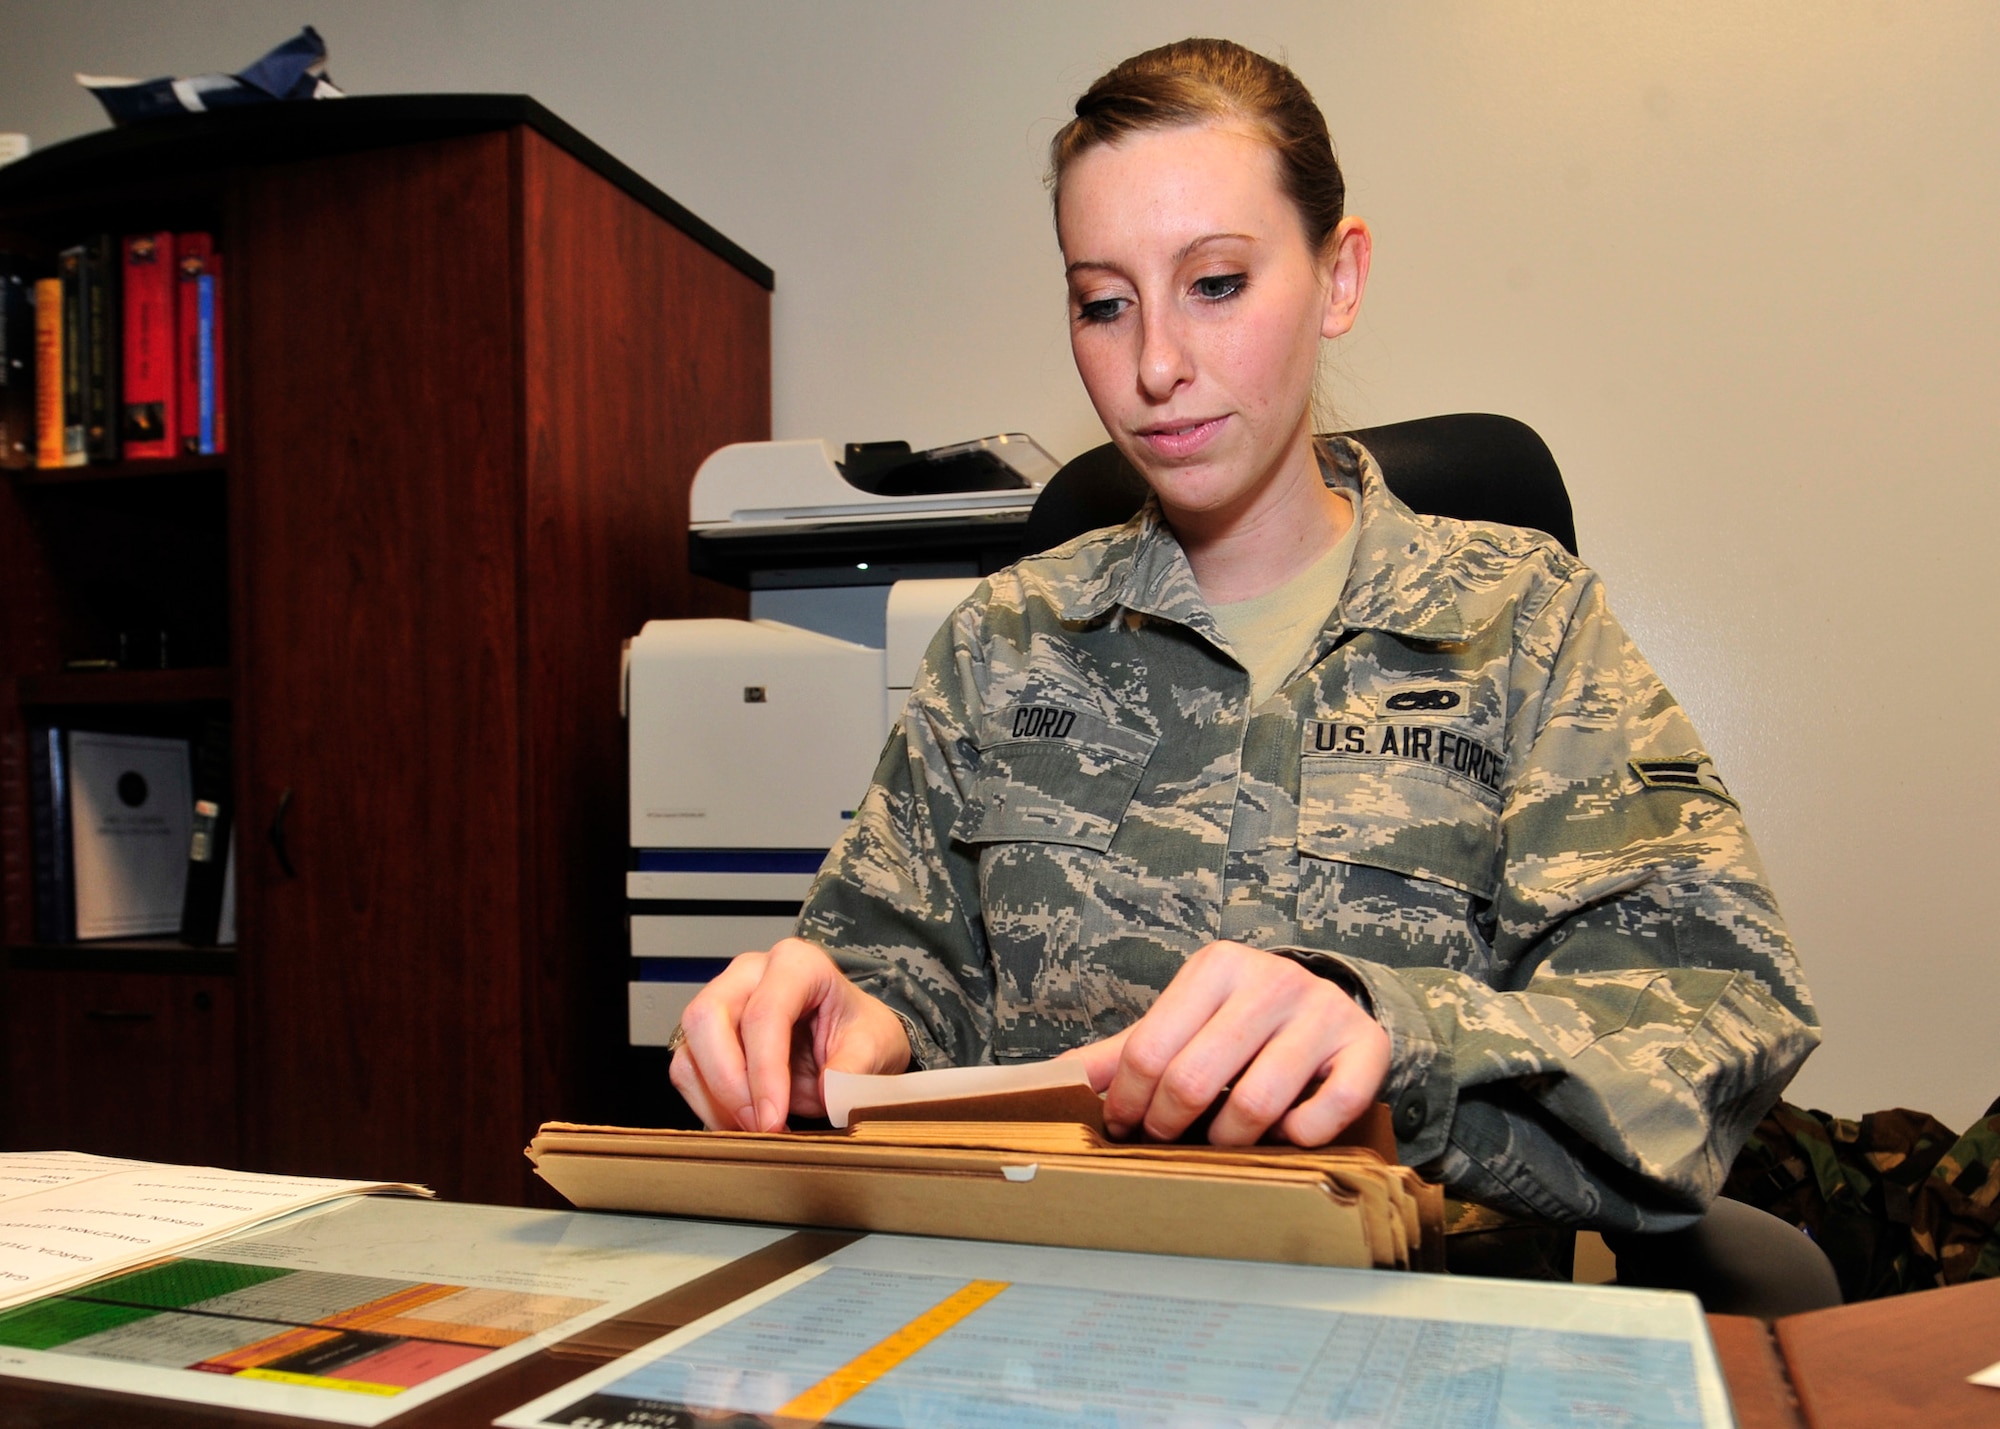 Airman 1st Class Lori Cord, 436th Aircraft Maintenance Squadron crew chief, places labels on folders Jan. 28, 2013, at the 436th AMXS on Dover Air Force Base, Del. Cord, who has been recovering from Guillain-Barre Syndrome since late Oct. 2012, was back for her first day of work since suffering from the illness. (U.S. Air Force photo by Tech. Sgt. Chuck Walker)